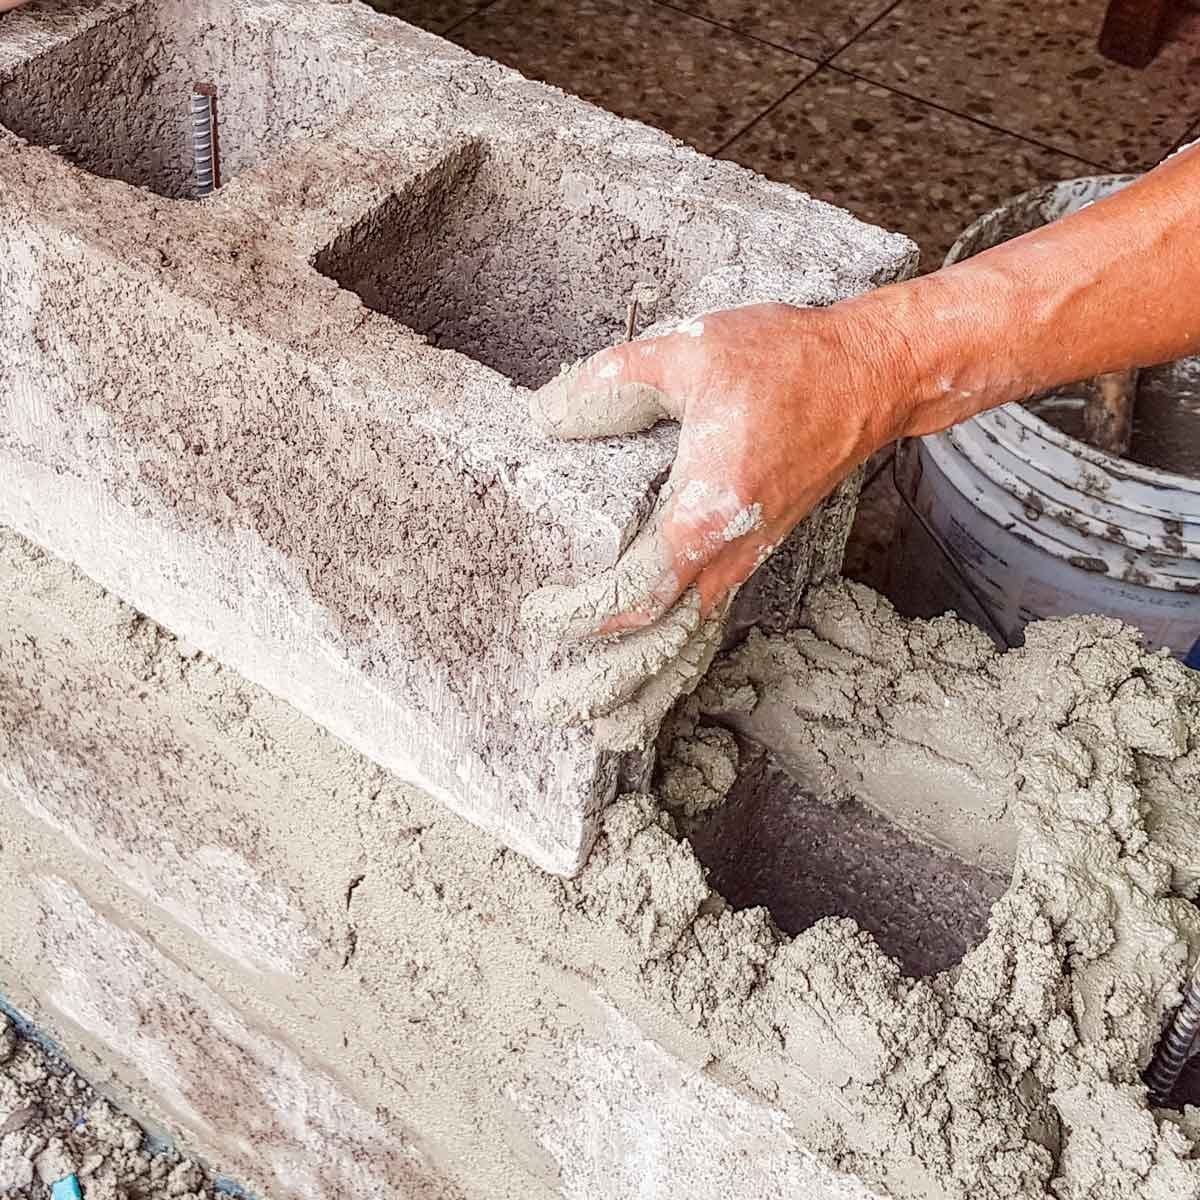 12 Most Common Mistakes When Pouring Concrete